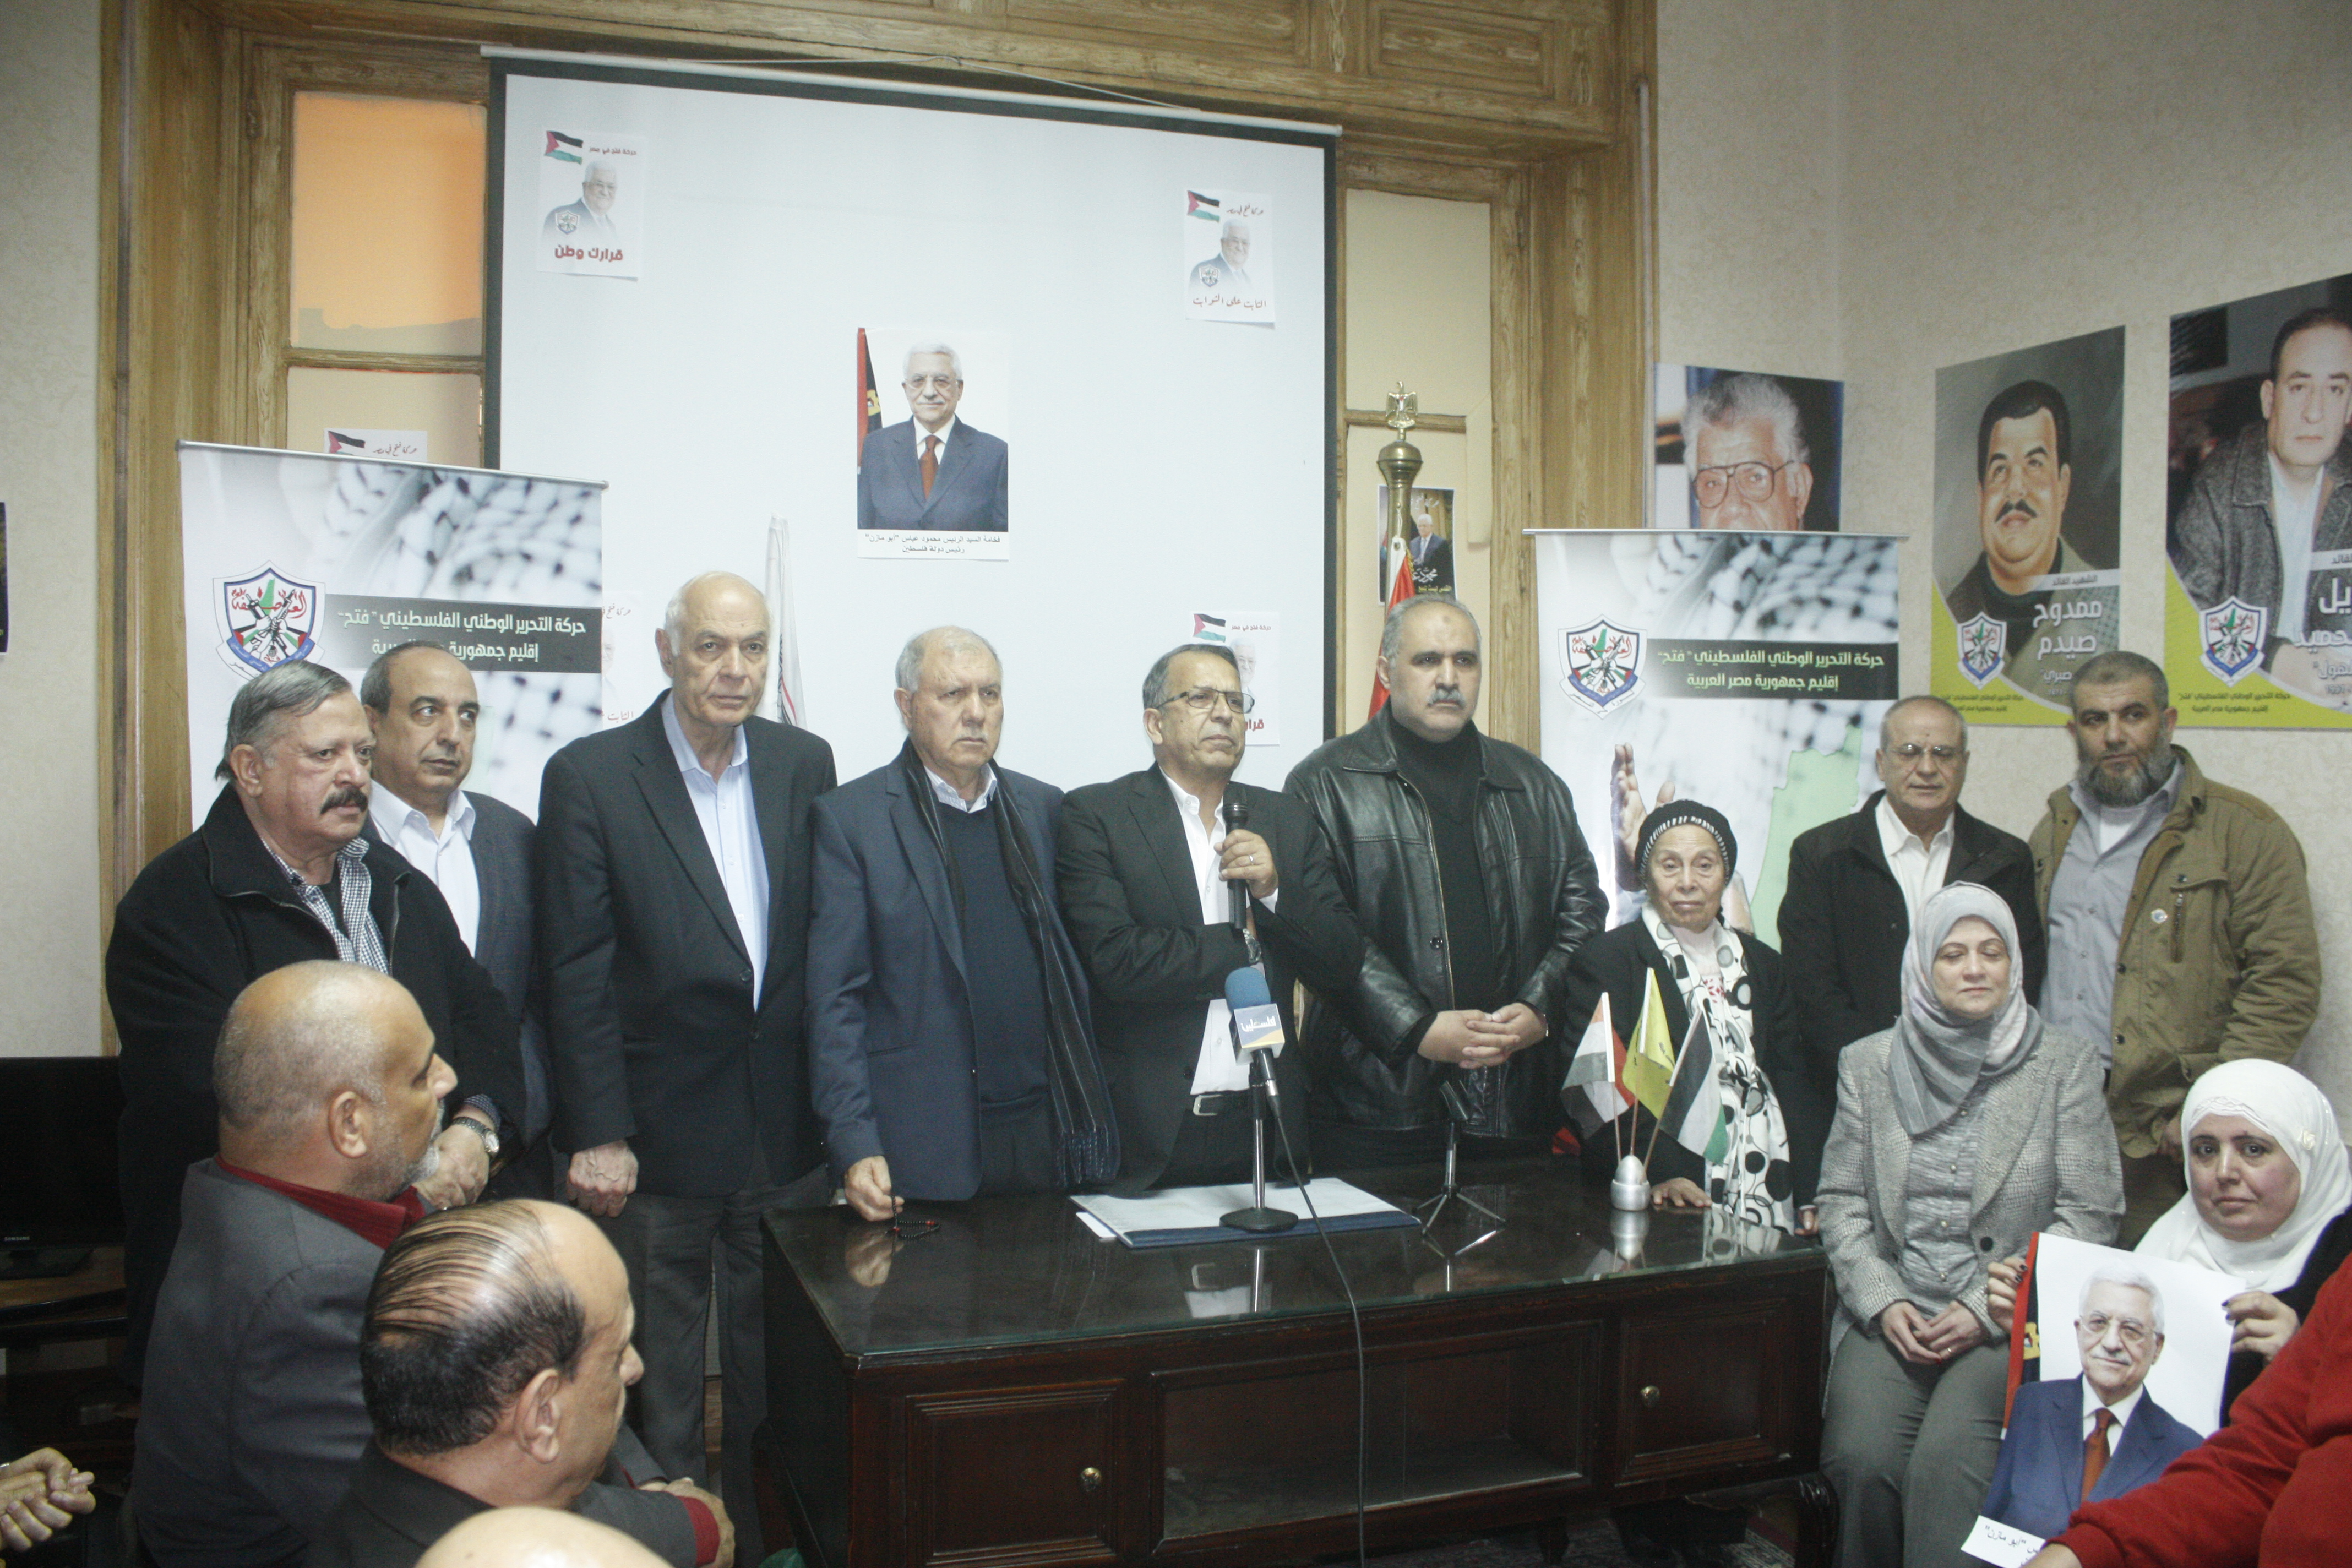 Fatah in Egypt organizes an event to reiterate full support of president Abbas